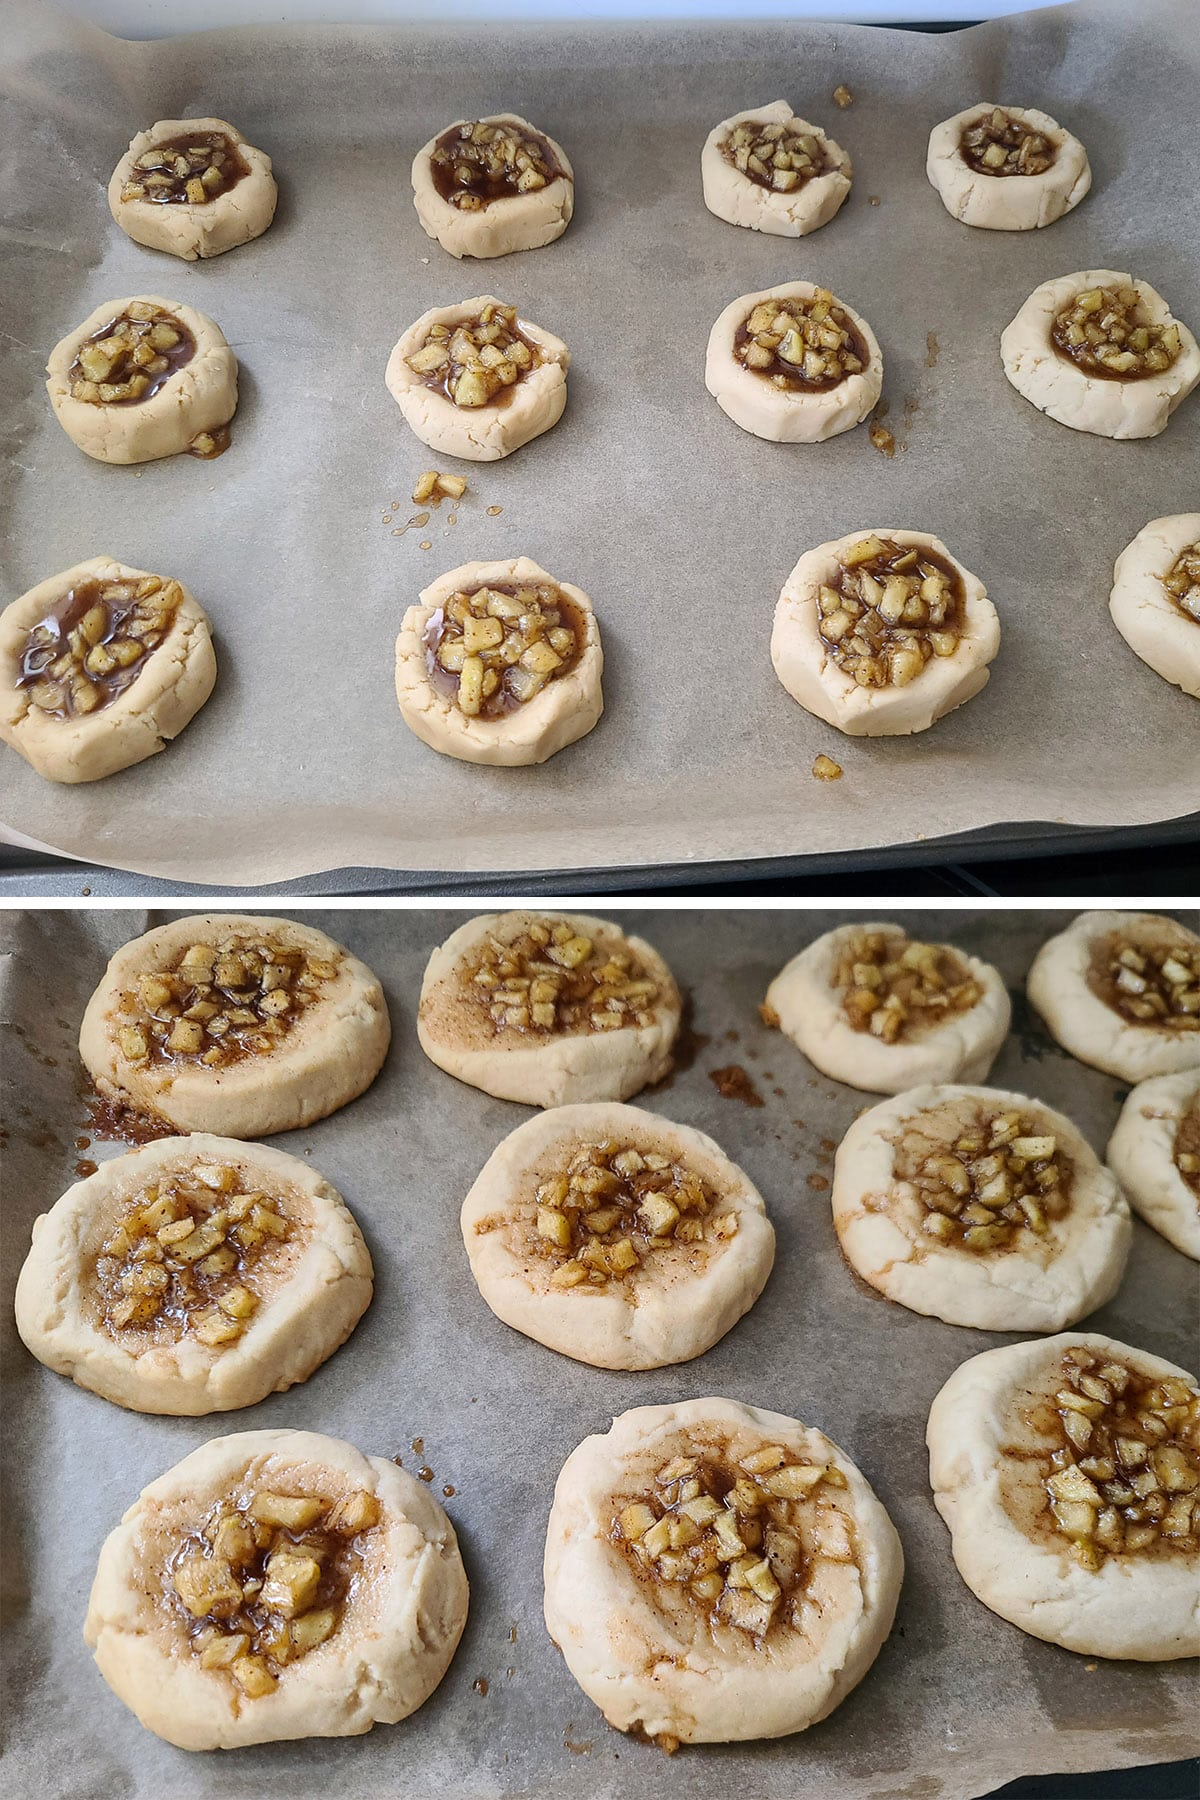 A 2 part image showing the cookies before and after being baked.